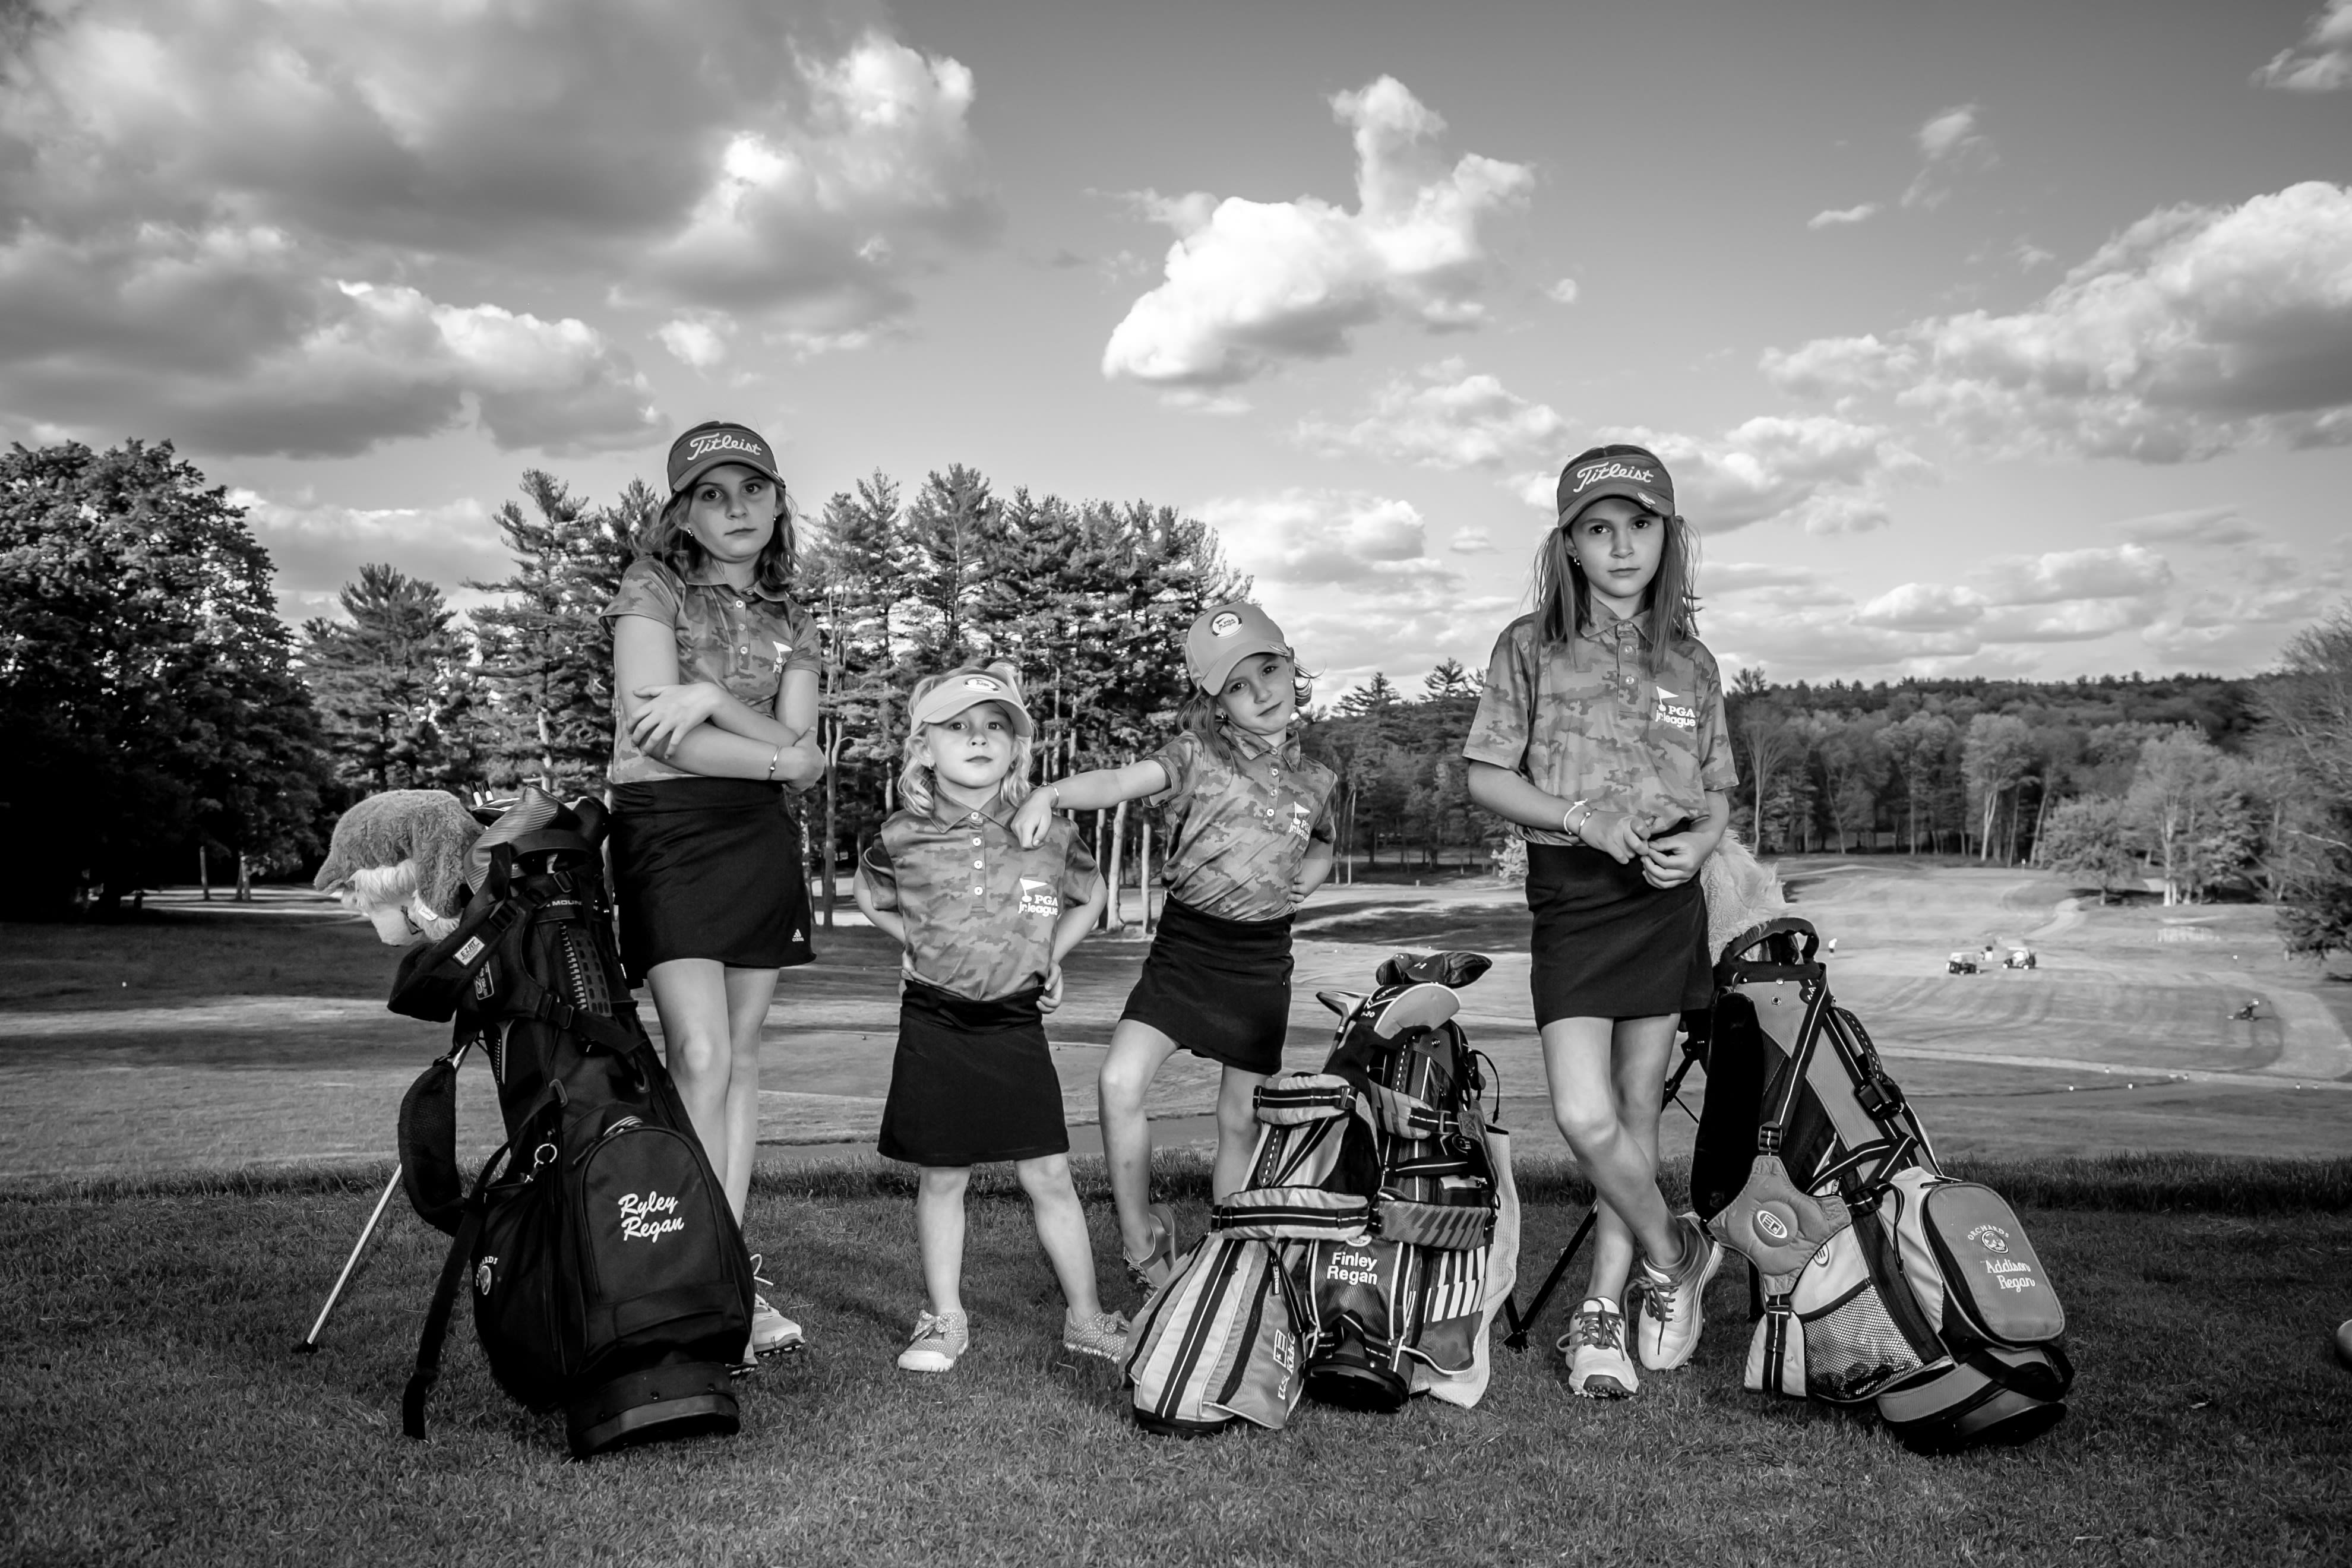 The Regan sisters, pictured here in their PGA Jr. League jerseys, are serious about their love of golf.